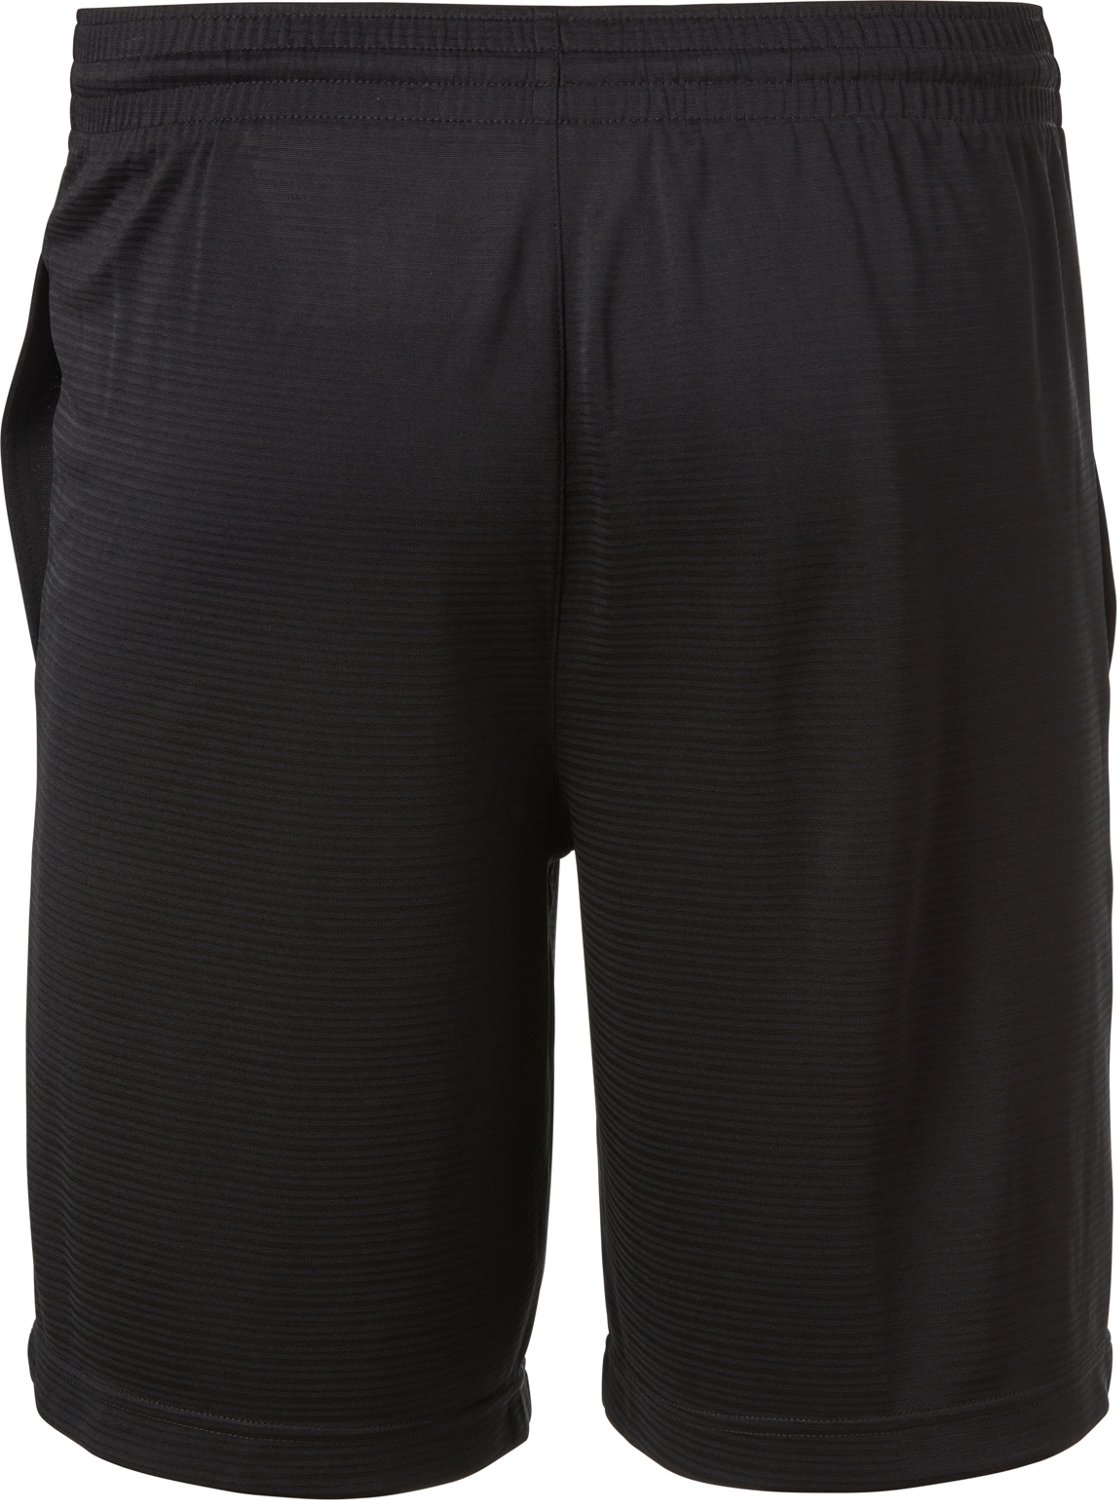 BCG Men's Dazzle Basketball Shorts 9 in